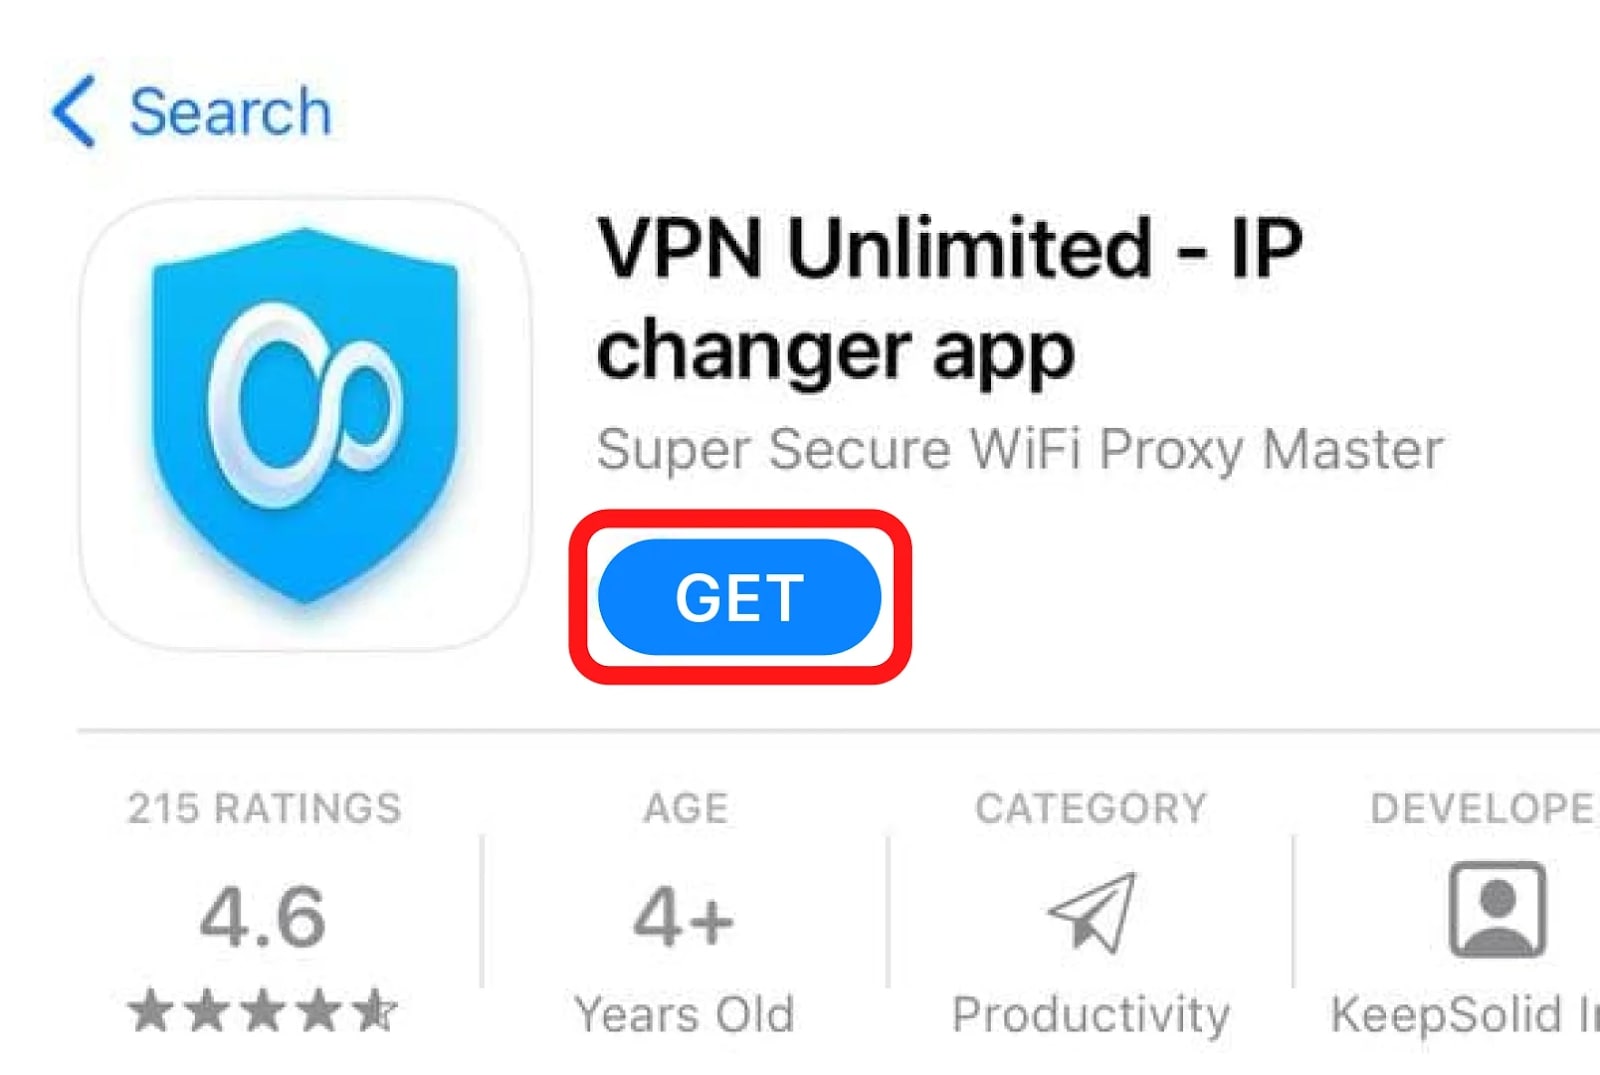 VPN Unlimited in the app store